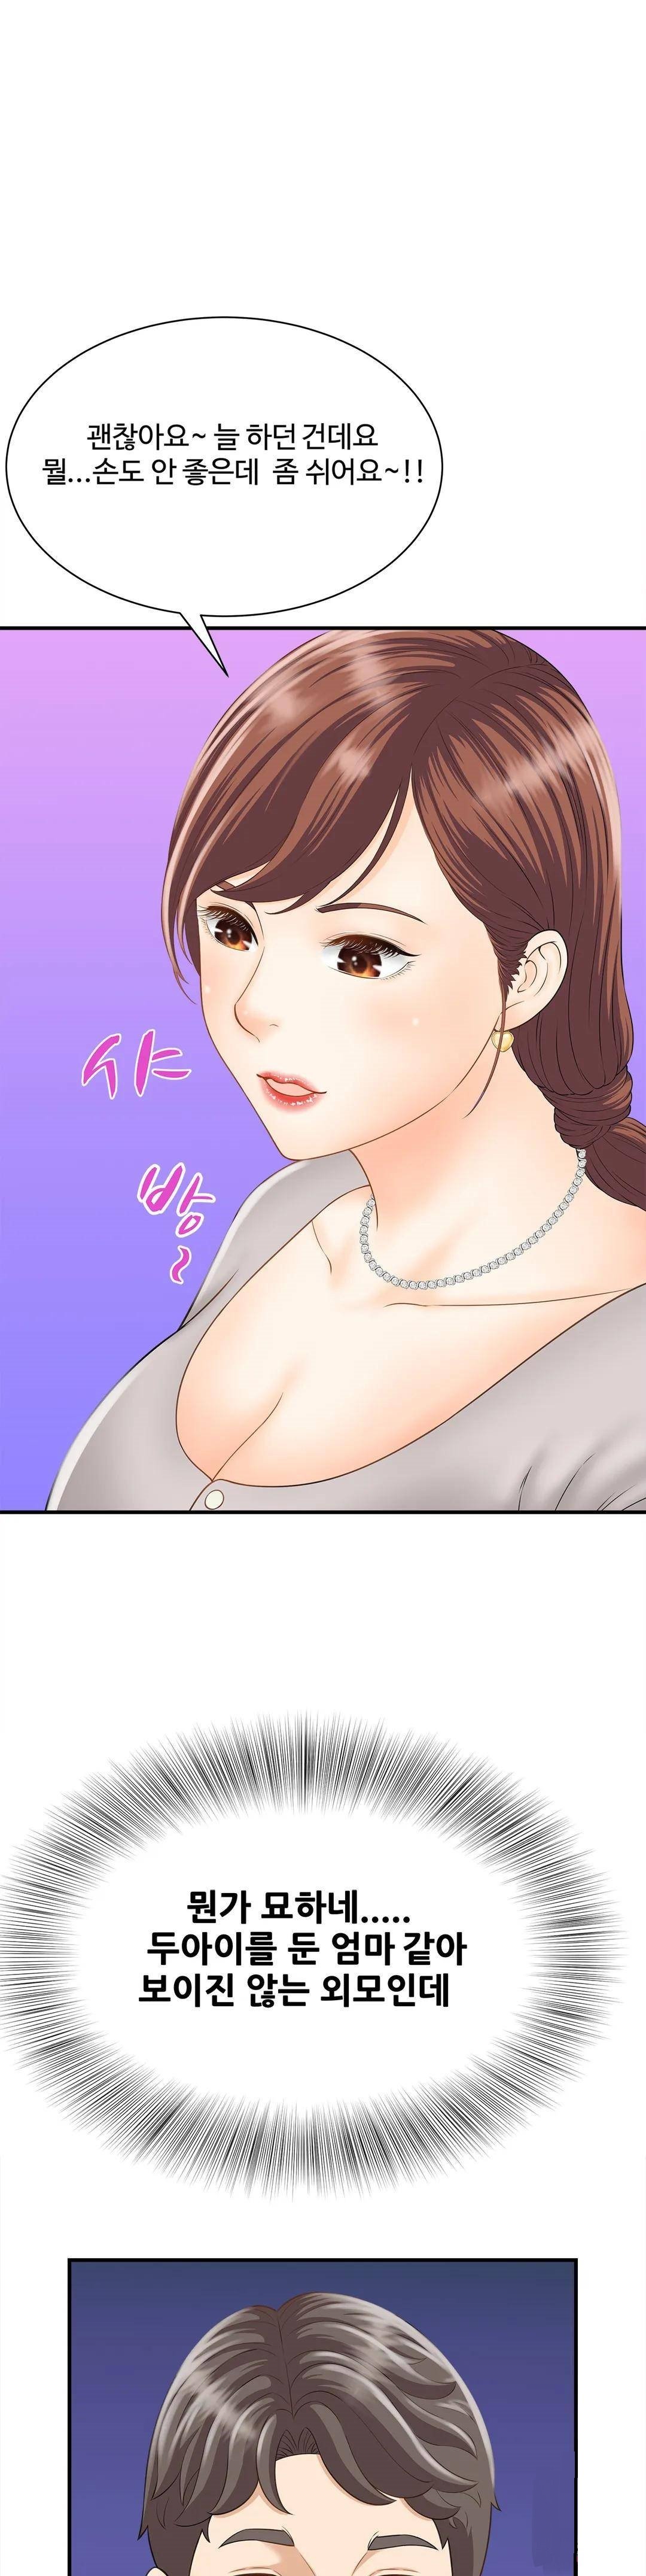 the-hunt-for-married-women-raw-chap-3-11